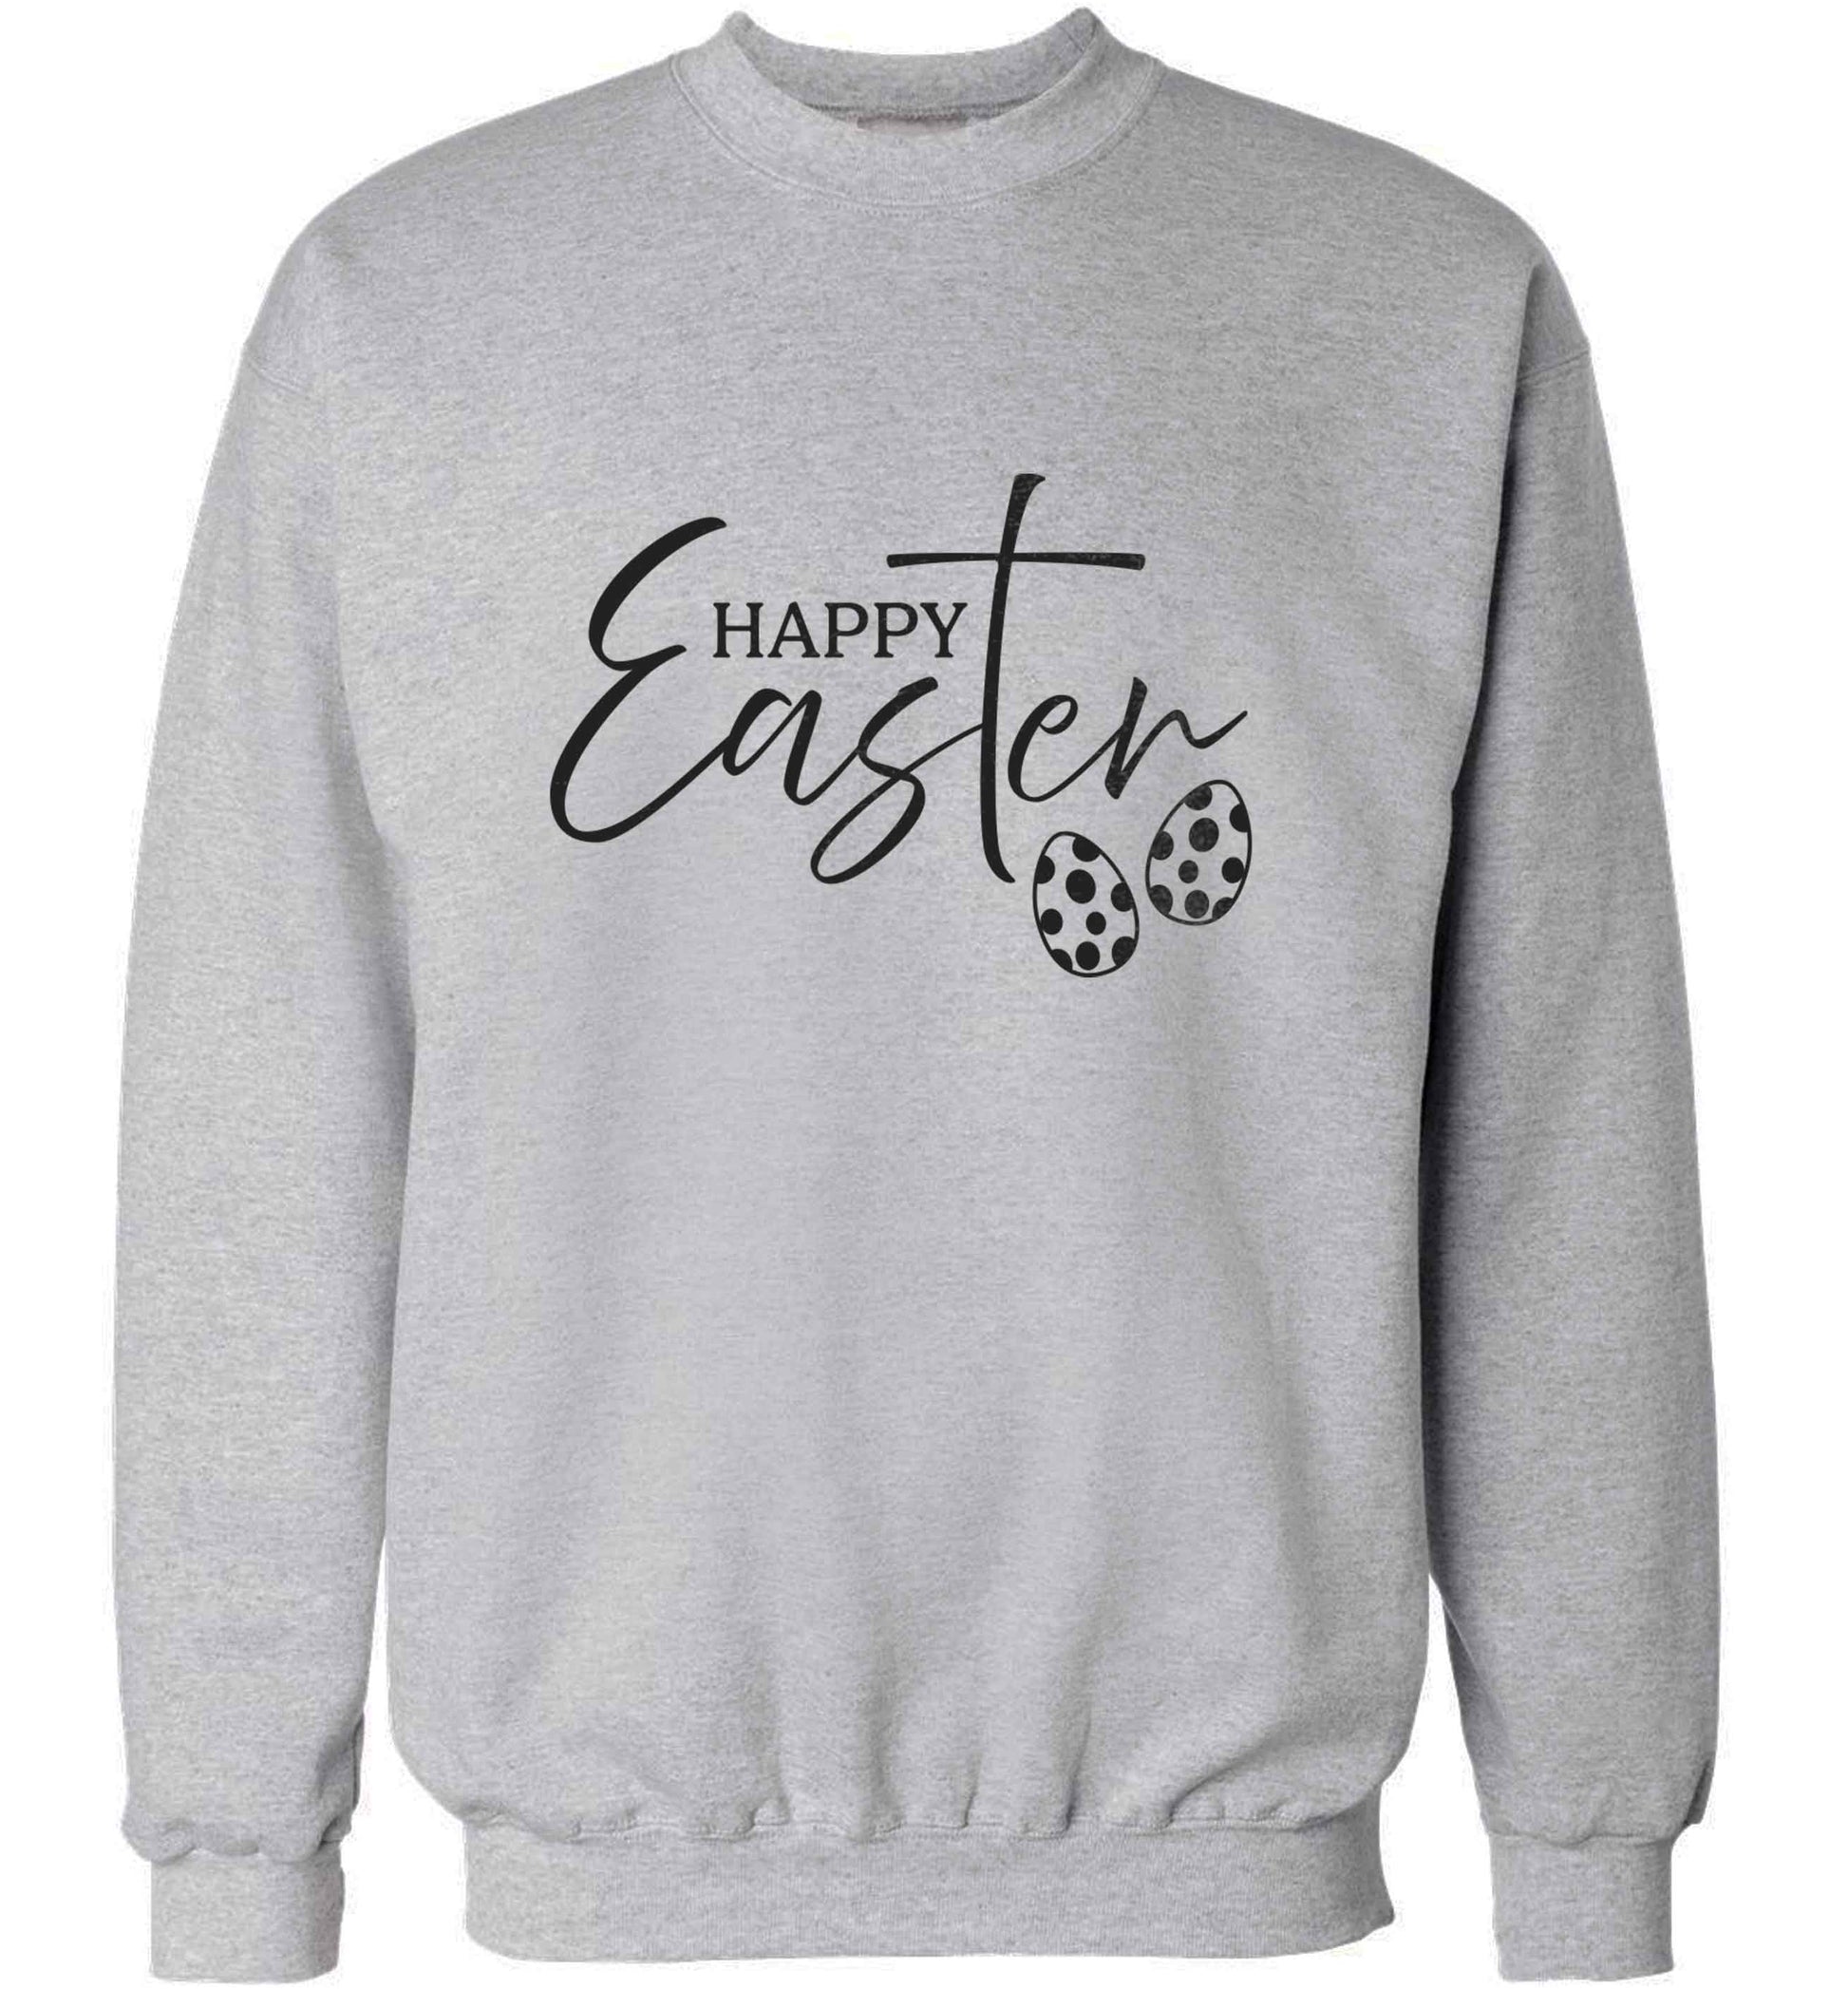 Happy Easter adult's unisex grey sweater 2XL